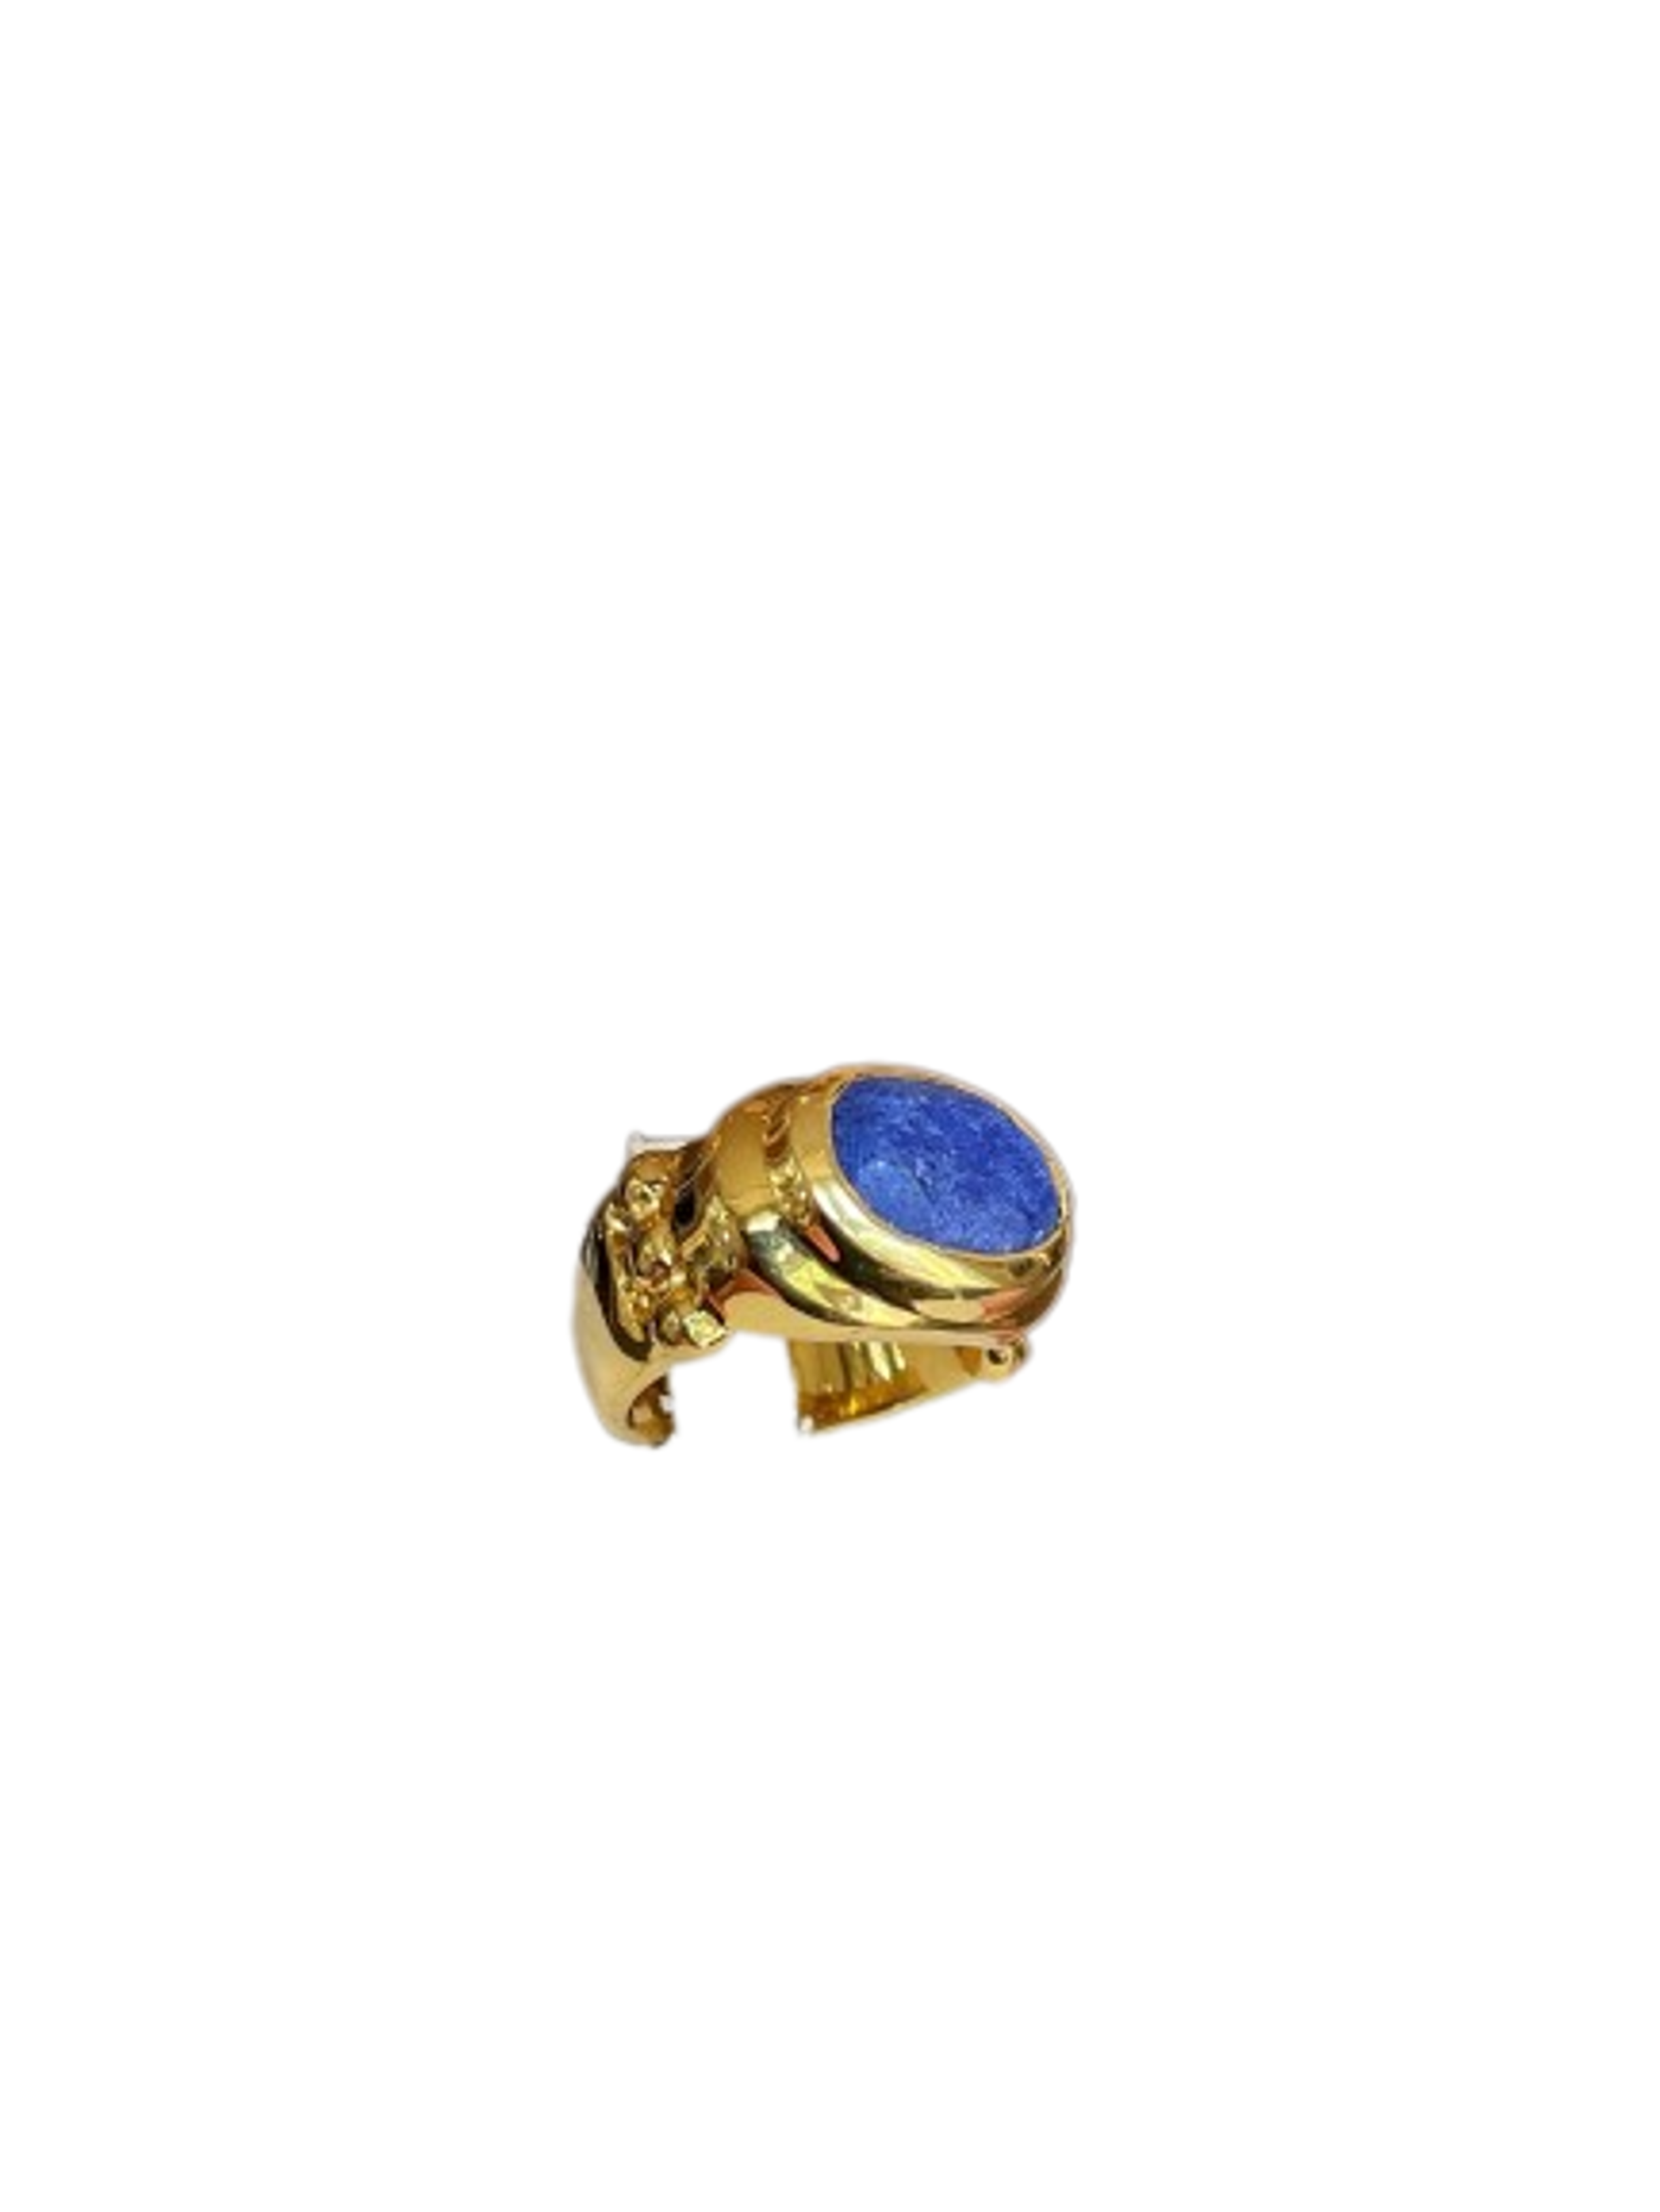 Lapis Signet Ring by J.Catma